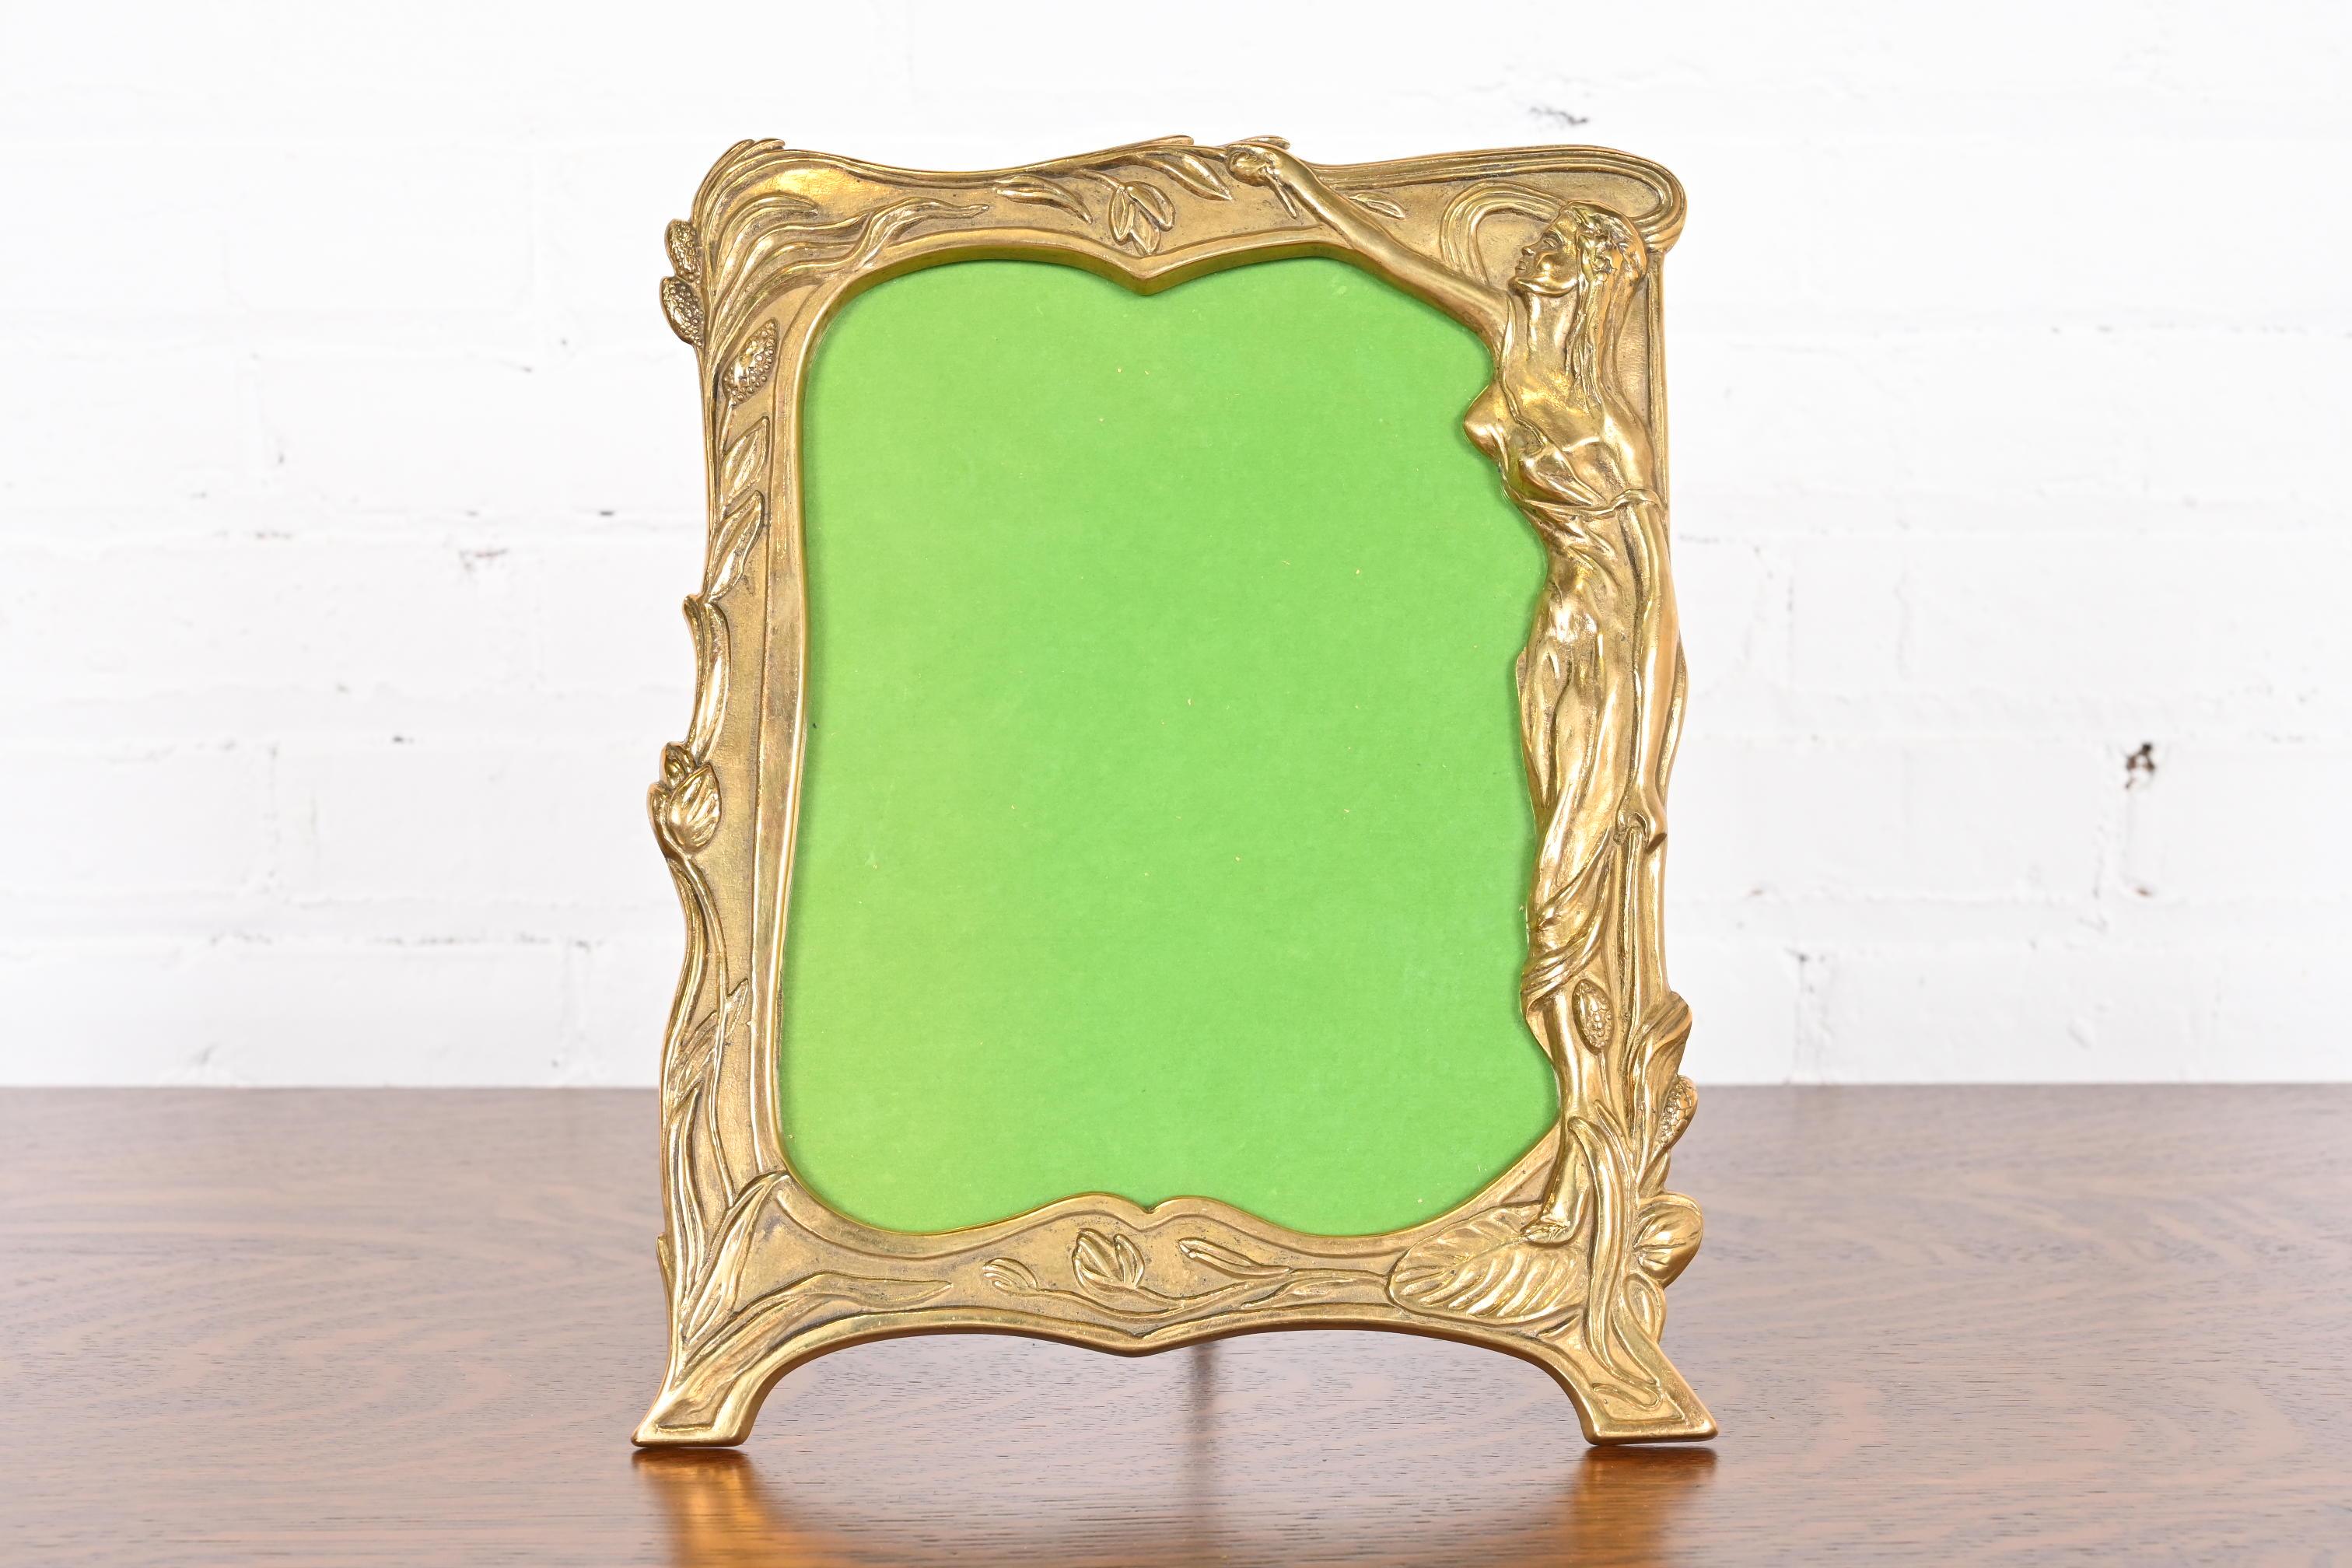 Antique Art Nouveau Gilt Bronze Large Picture Frame, Circa 1930s In Good Condition For Sale In South Bend, IN